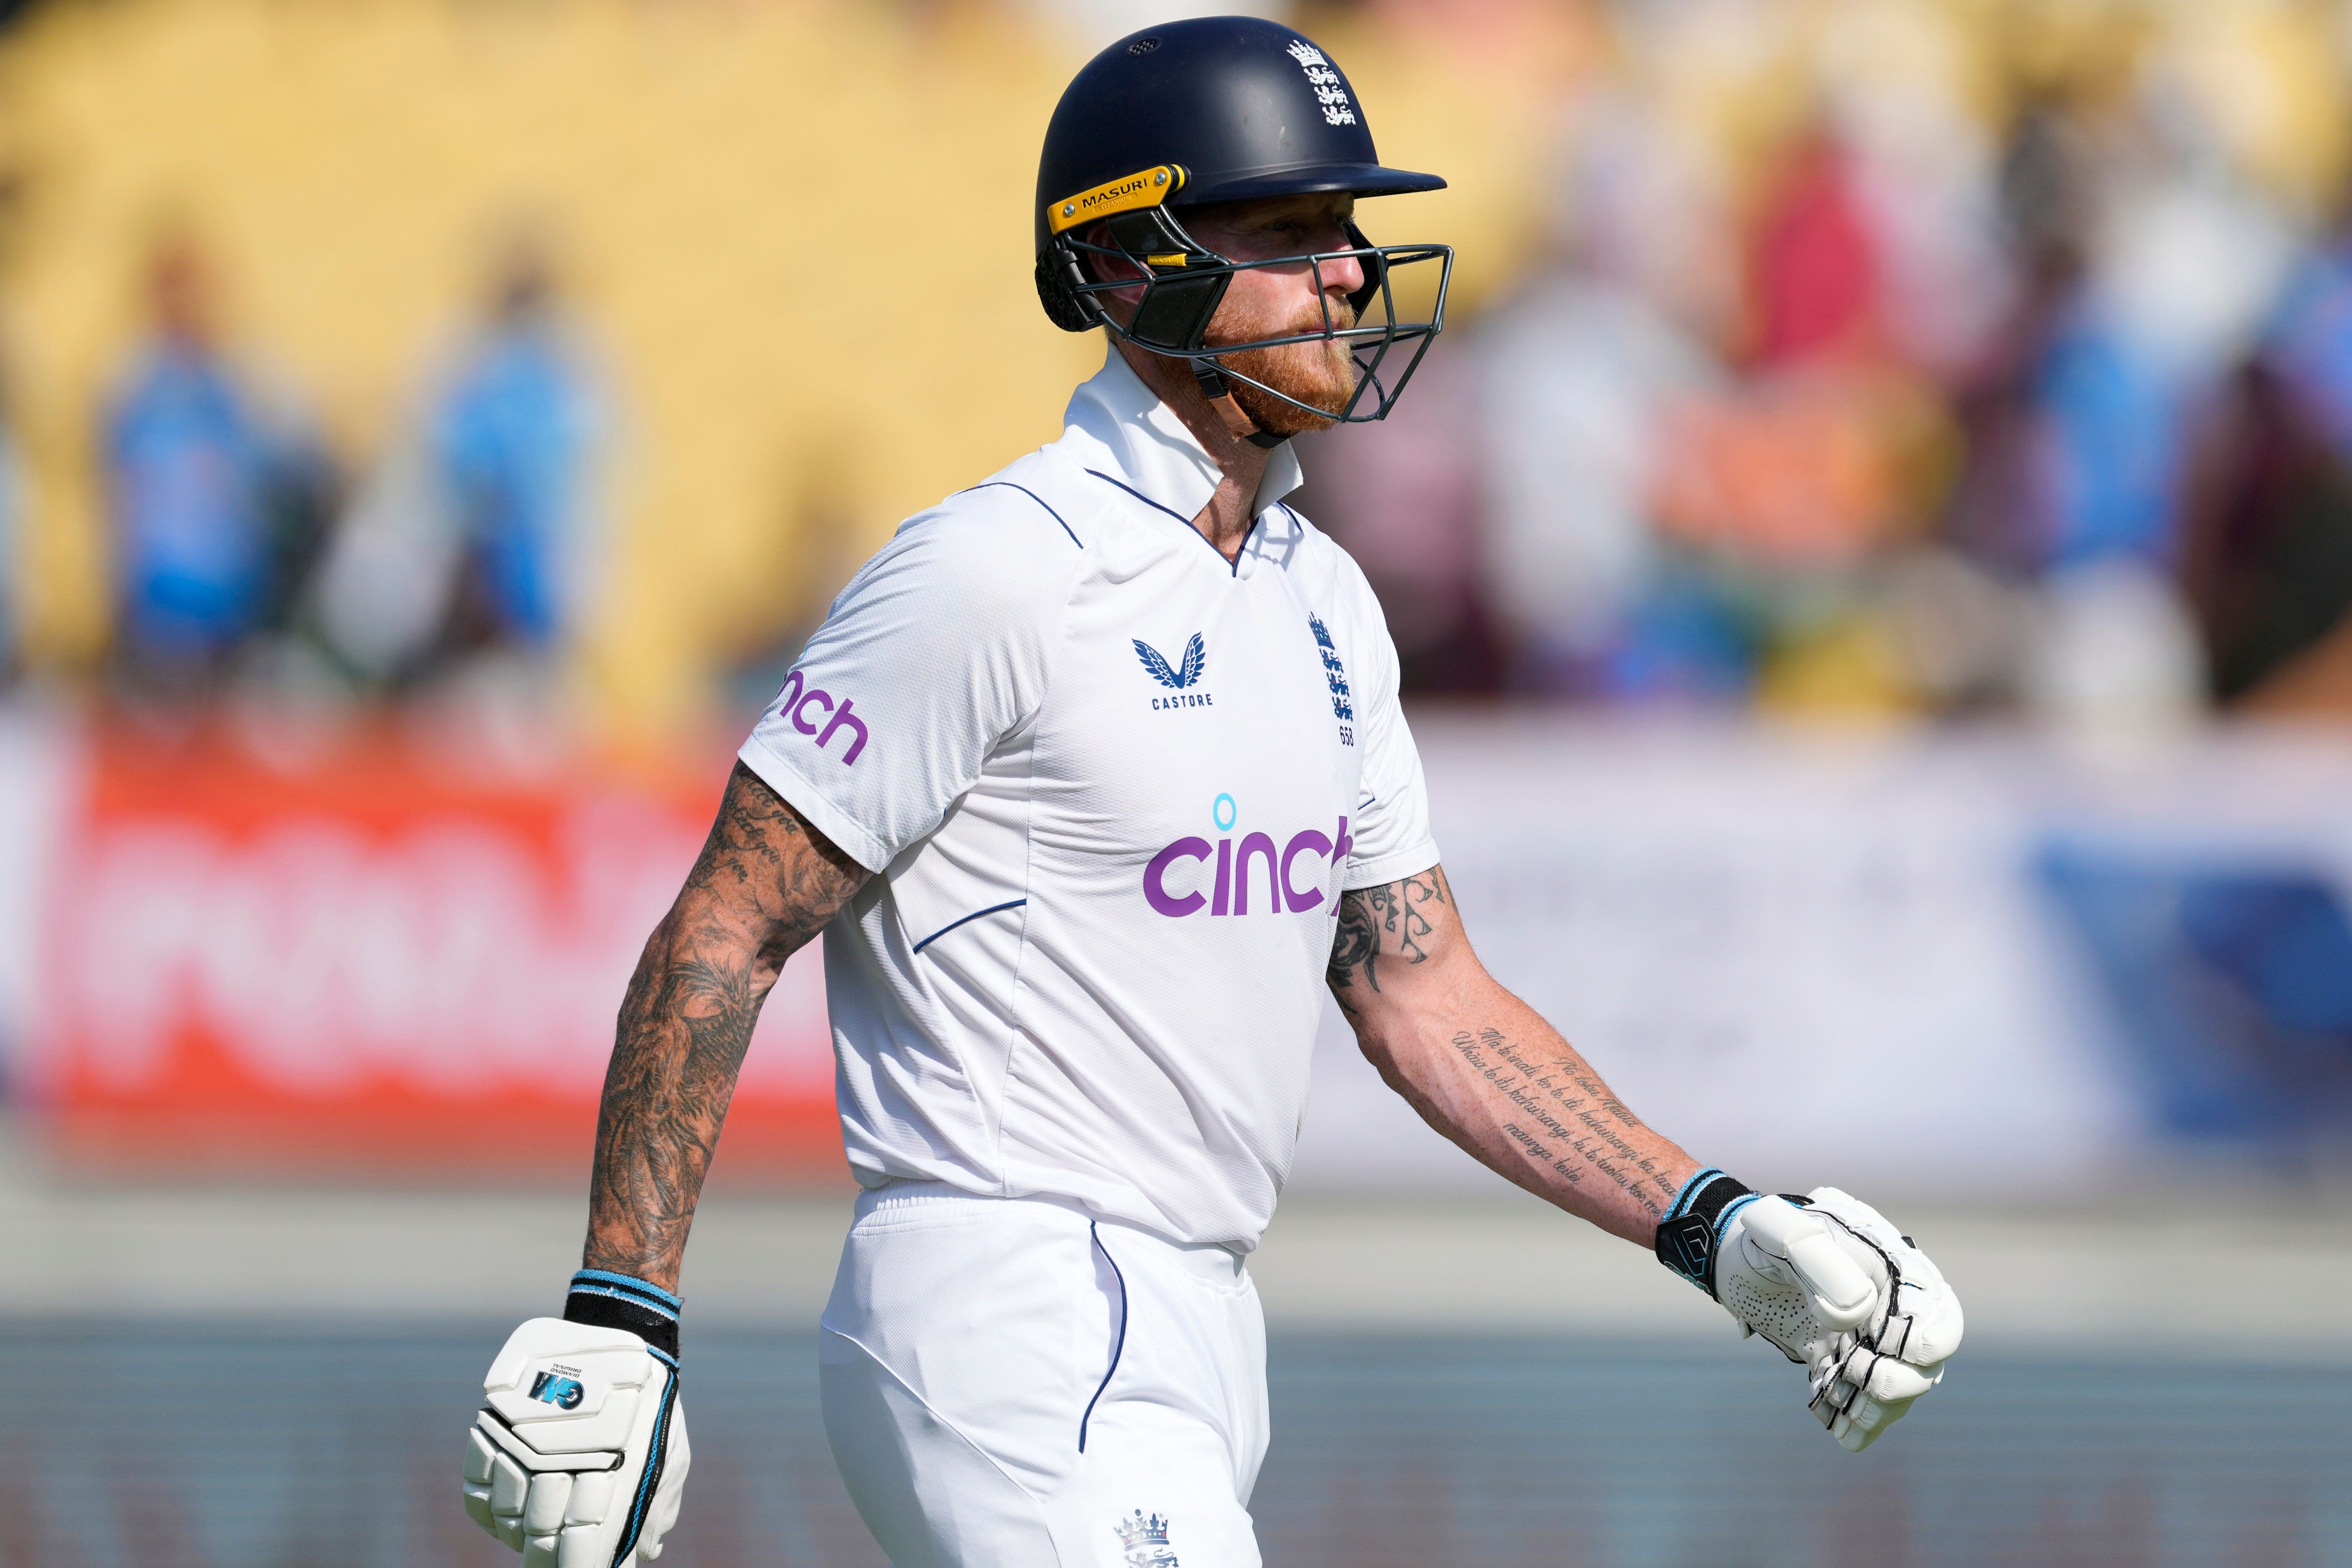 Ben Stokes’ side suffered a bruising defeat in the third Test (AP Photo/Ajit Solanki)